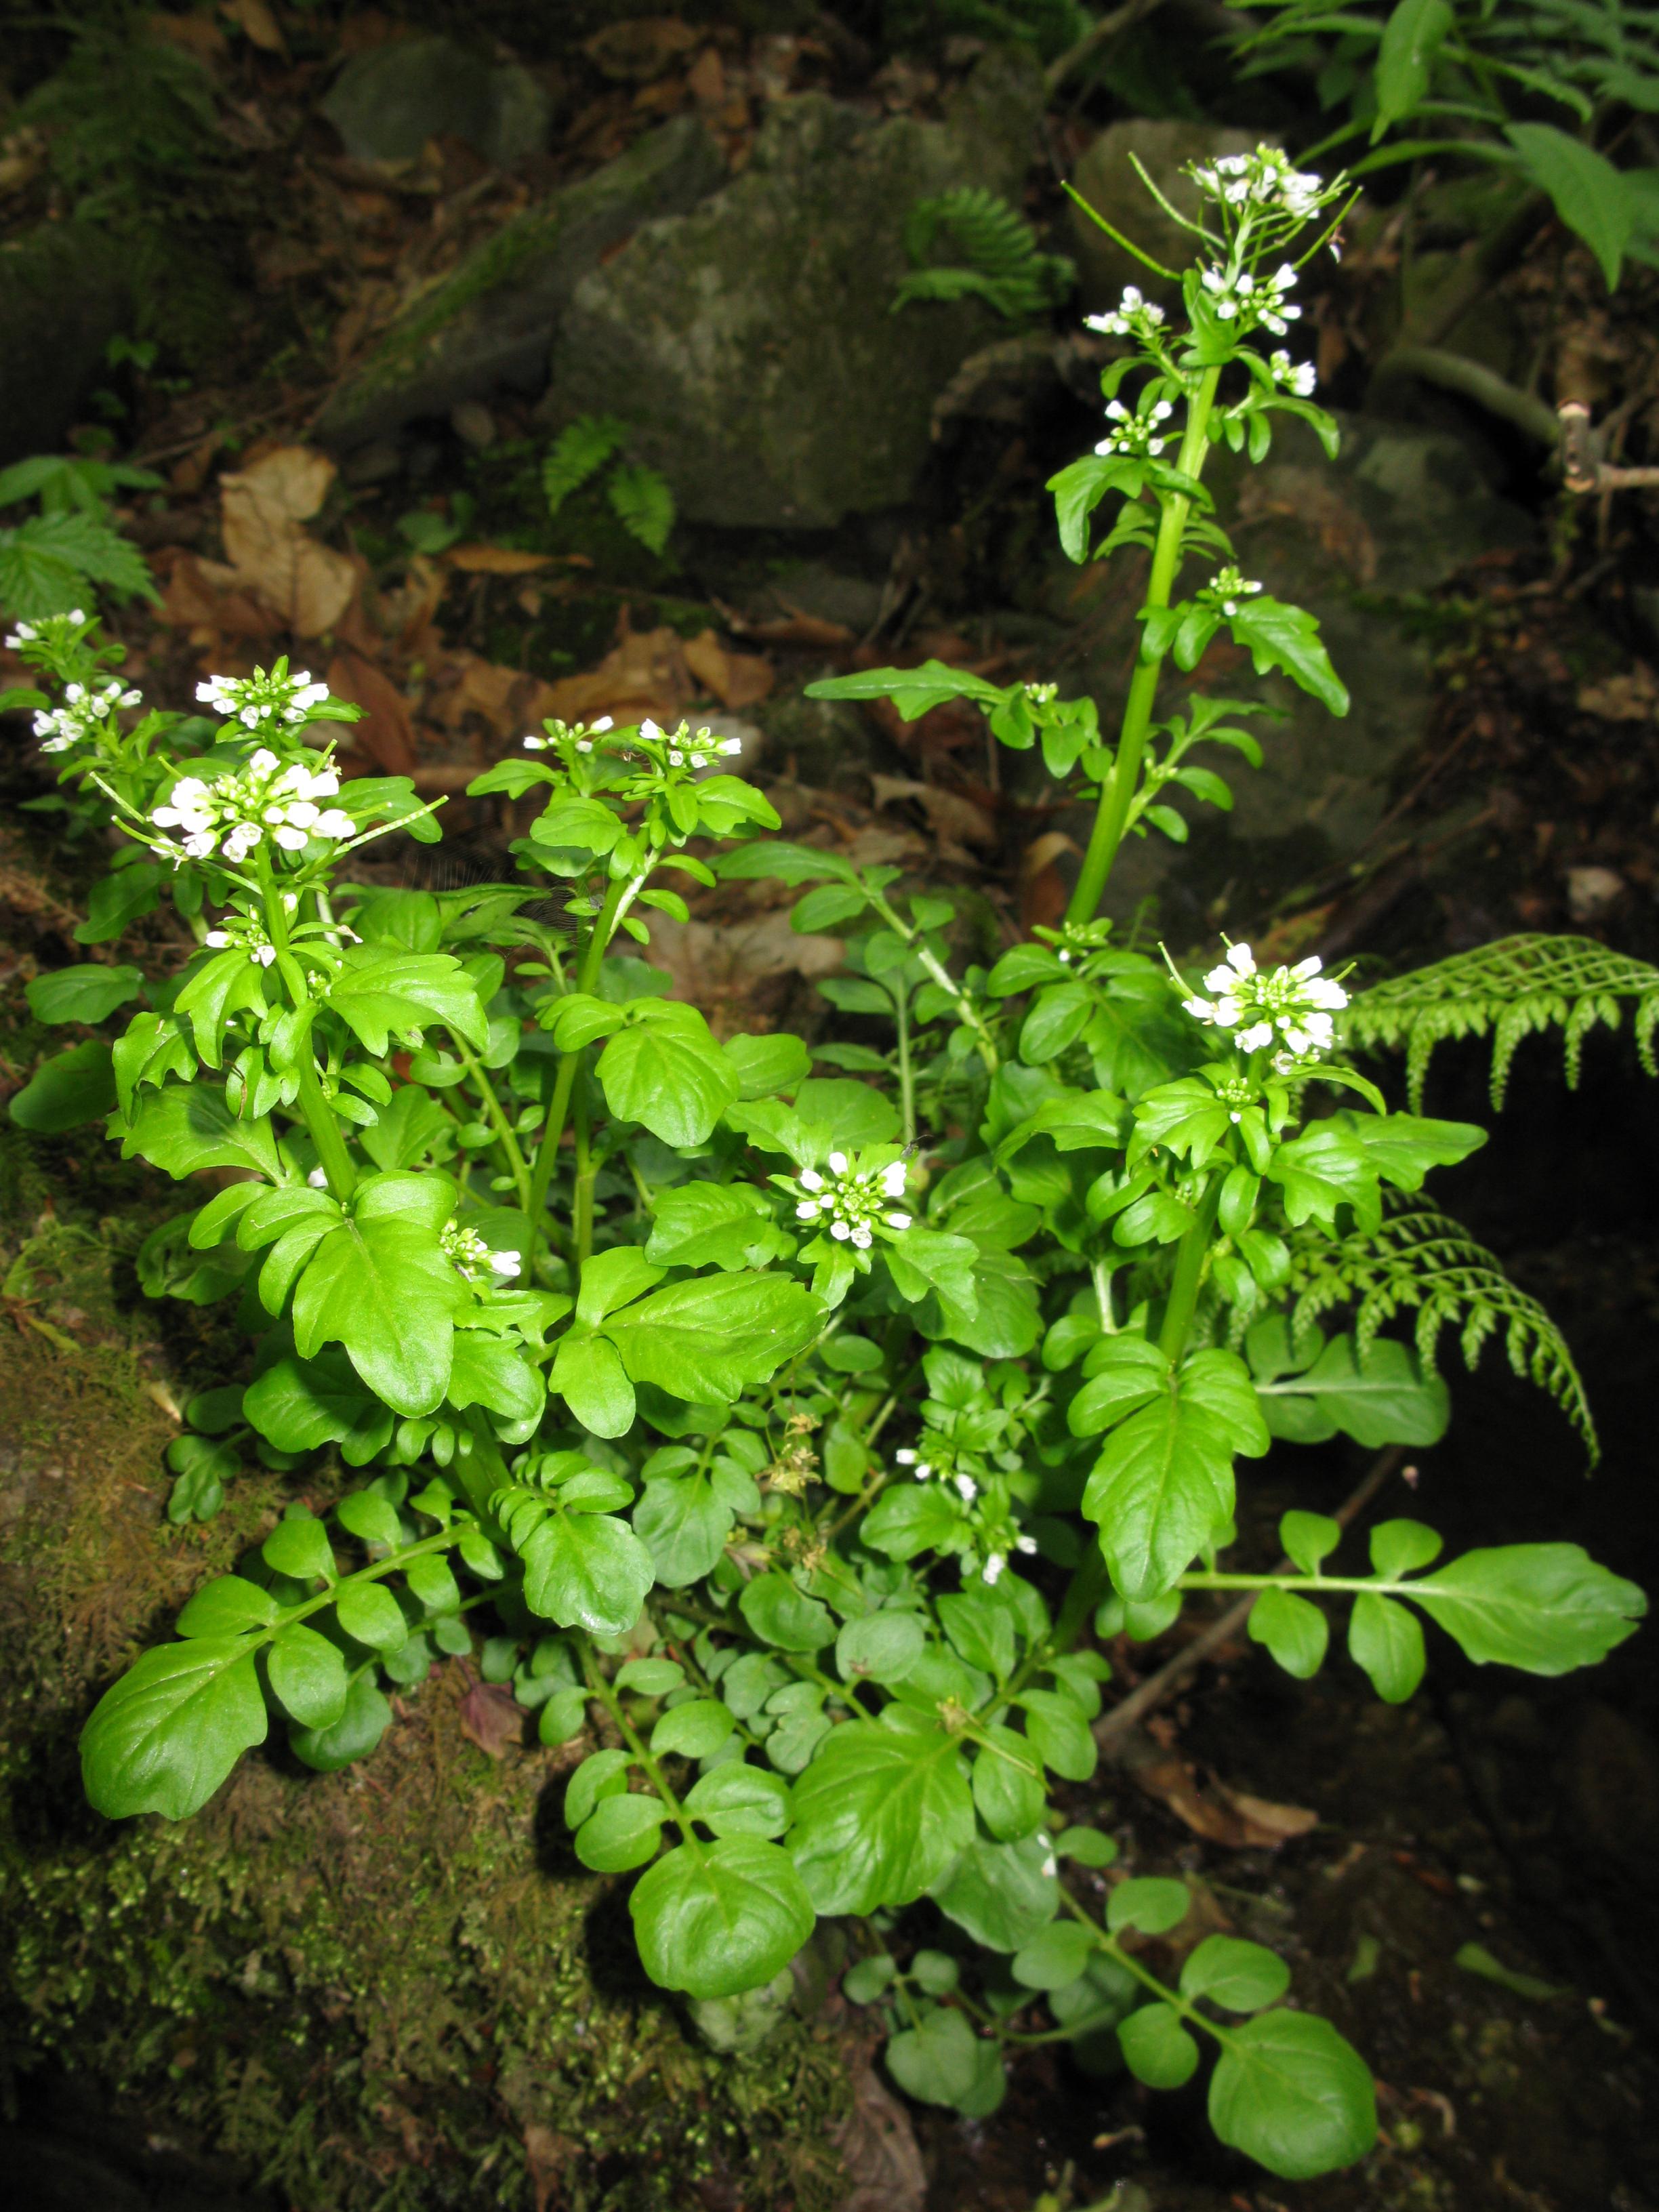 white flowers and buds with lime leaves and stems